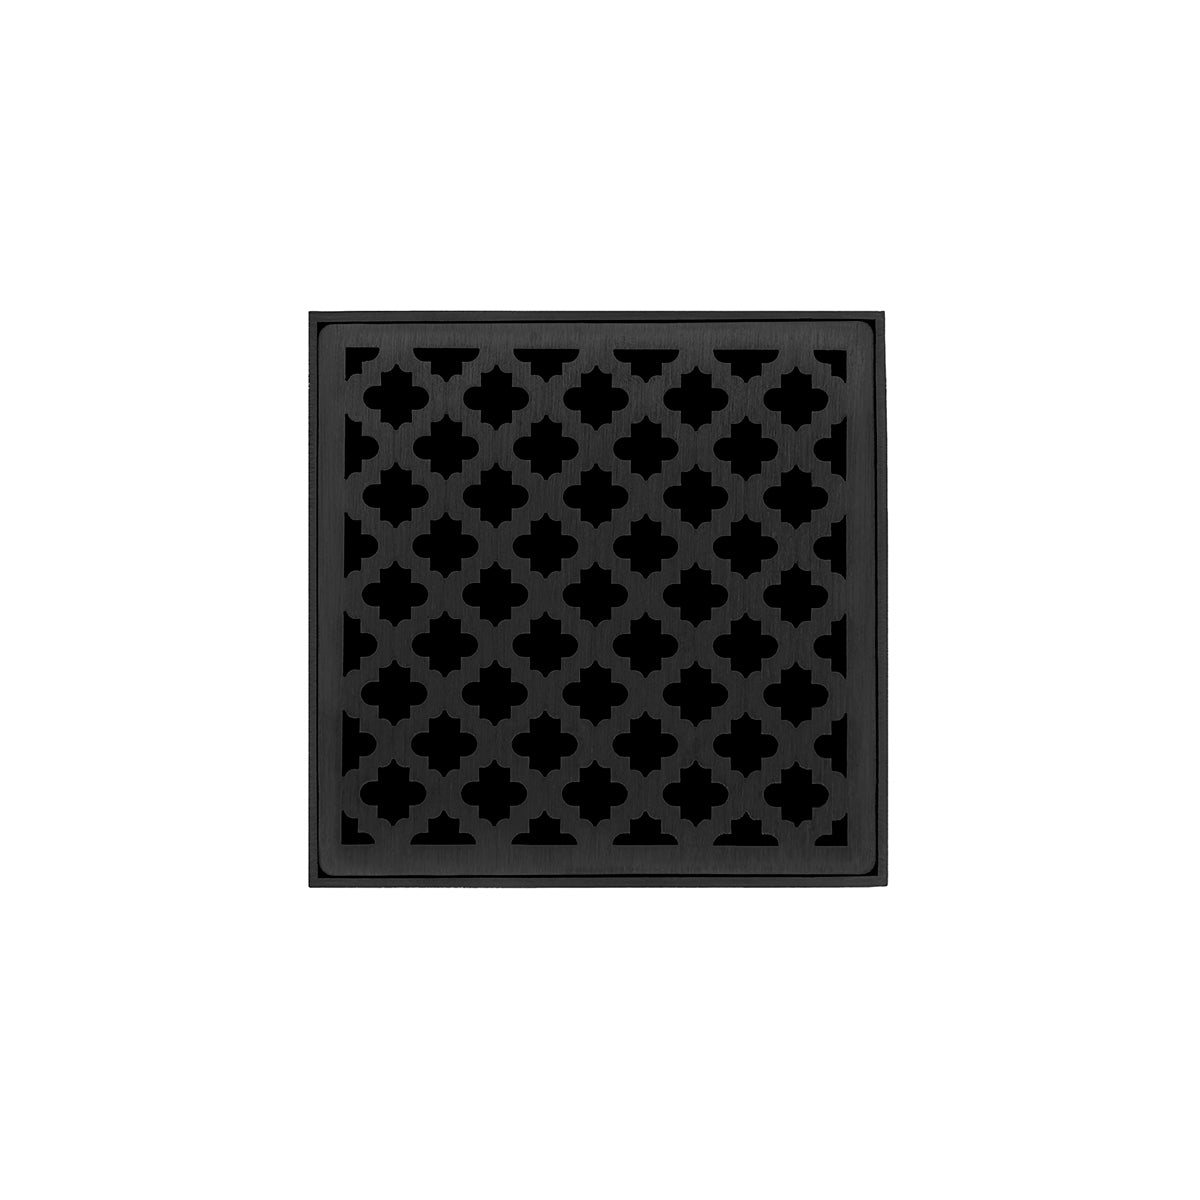 Infinity Drain 4" x 4" MD 4 Premium Center Drain Kit with Moor Pattern Decorative Plate with PVC Drain Body, 2" Outlet